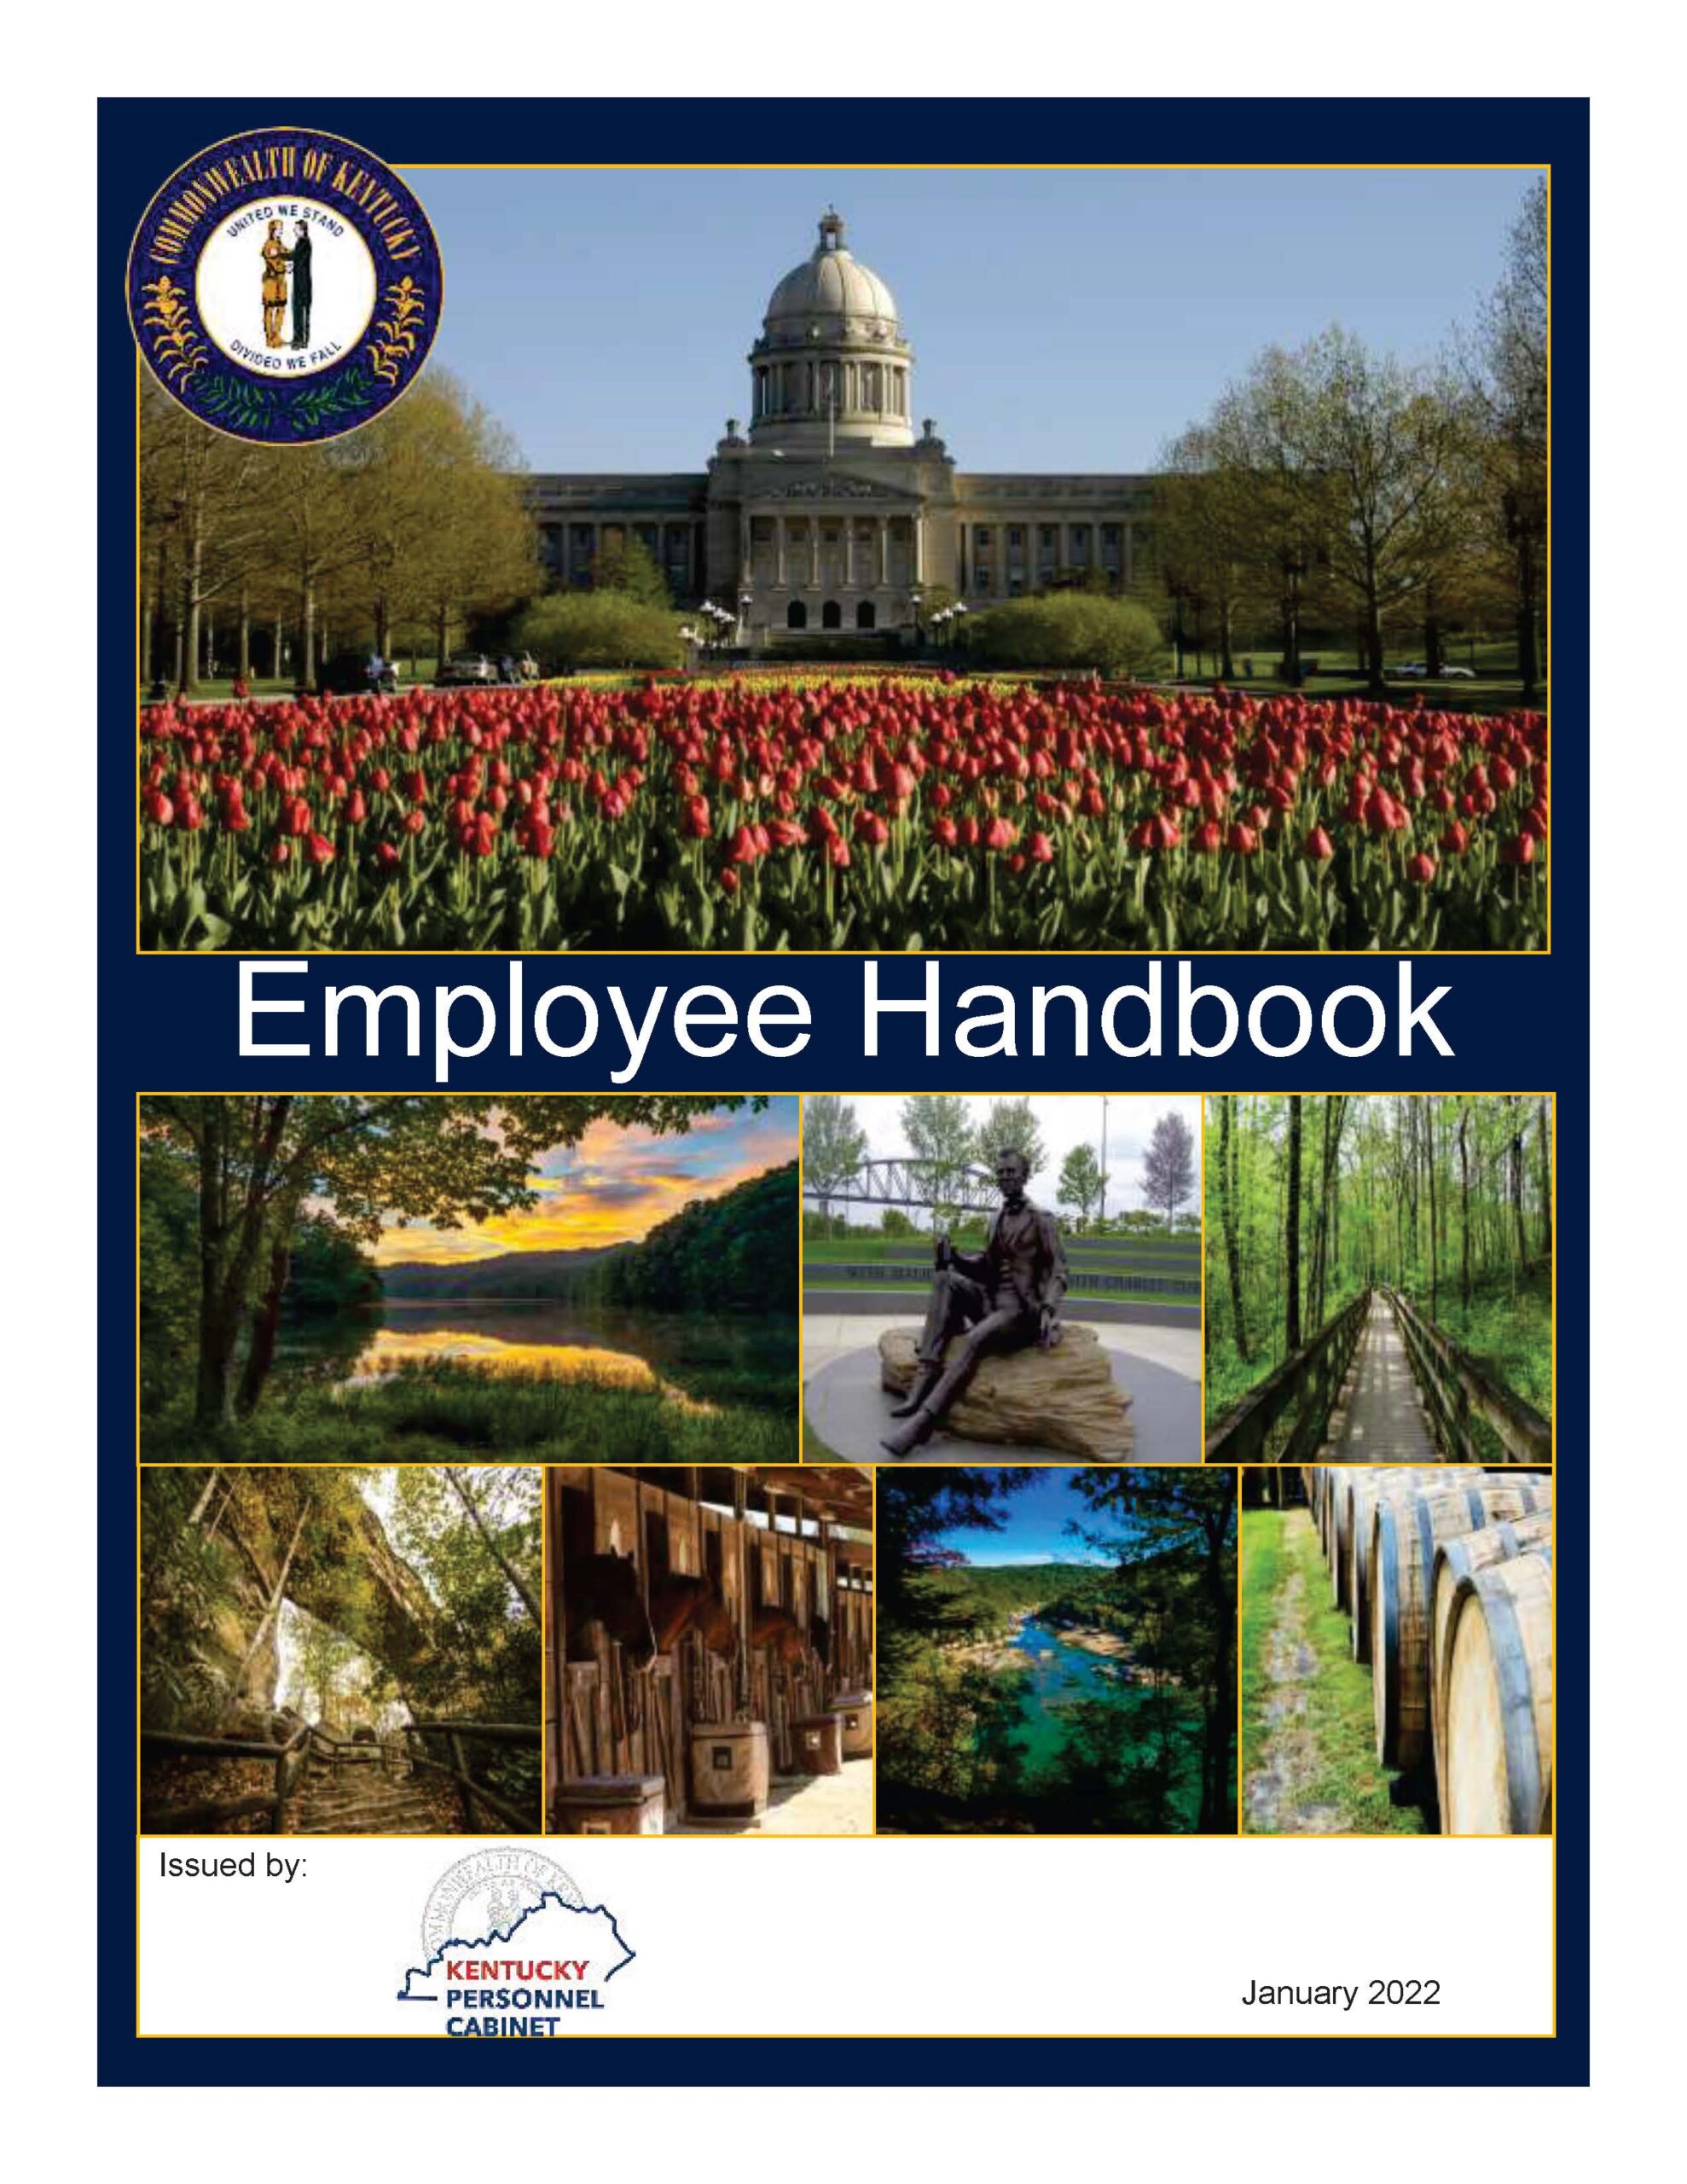 Front of the employee handbook with various images including state capitol building, whiskey barrels, a nature scenes.